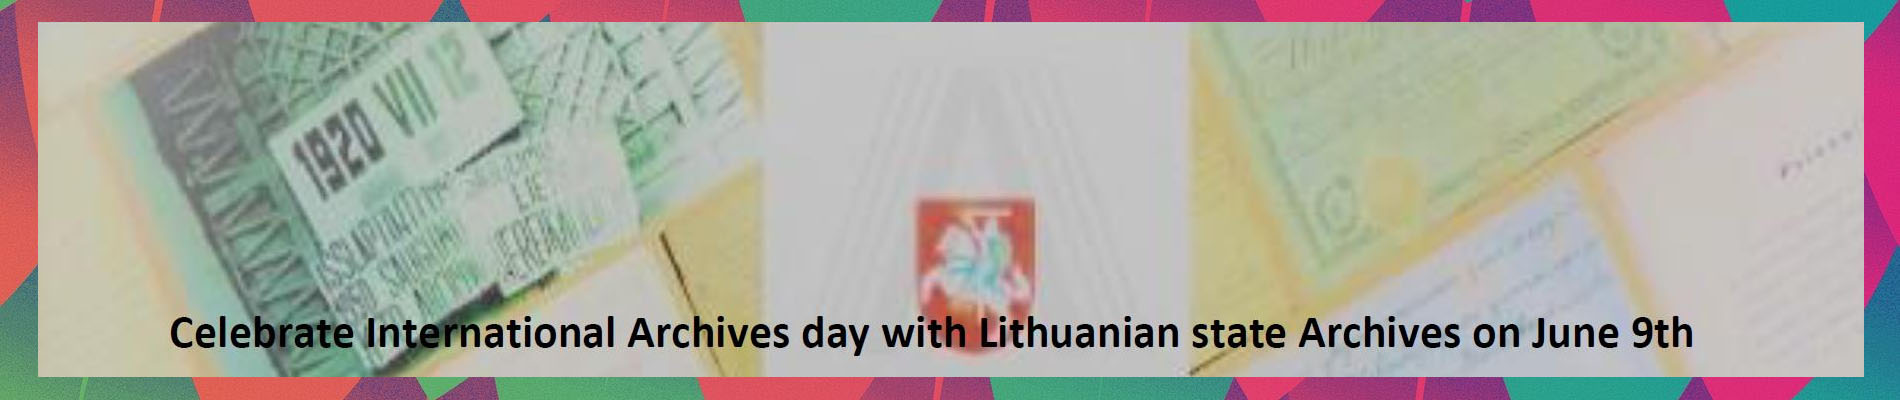 lithuanian_state_archives_iad17_banner